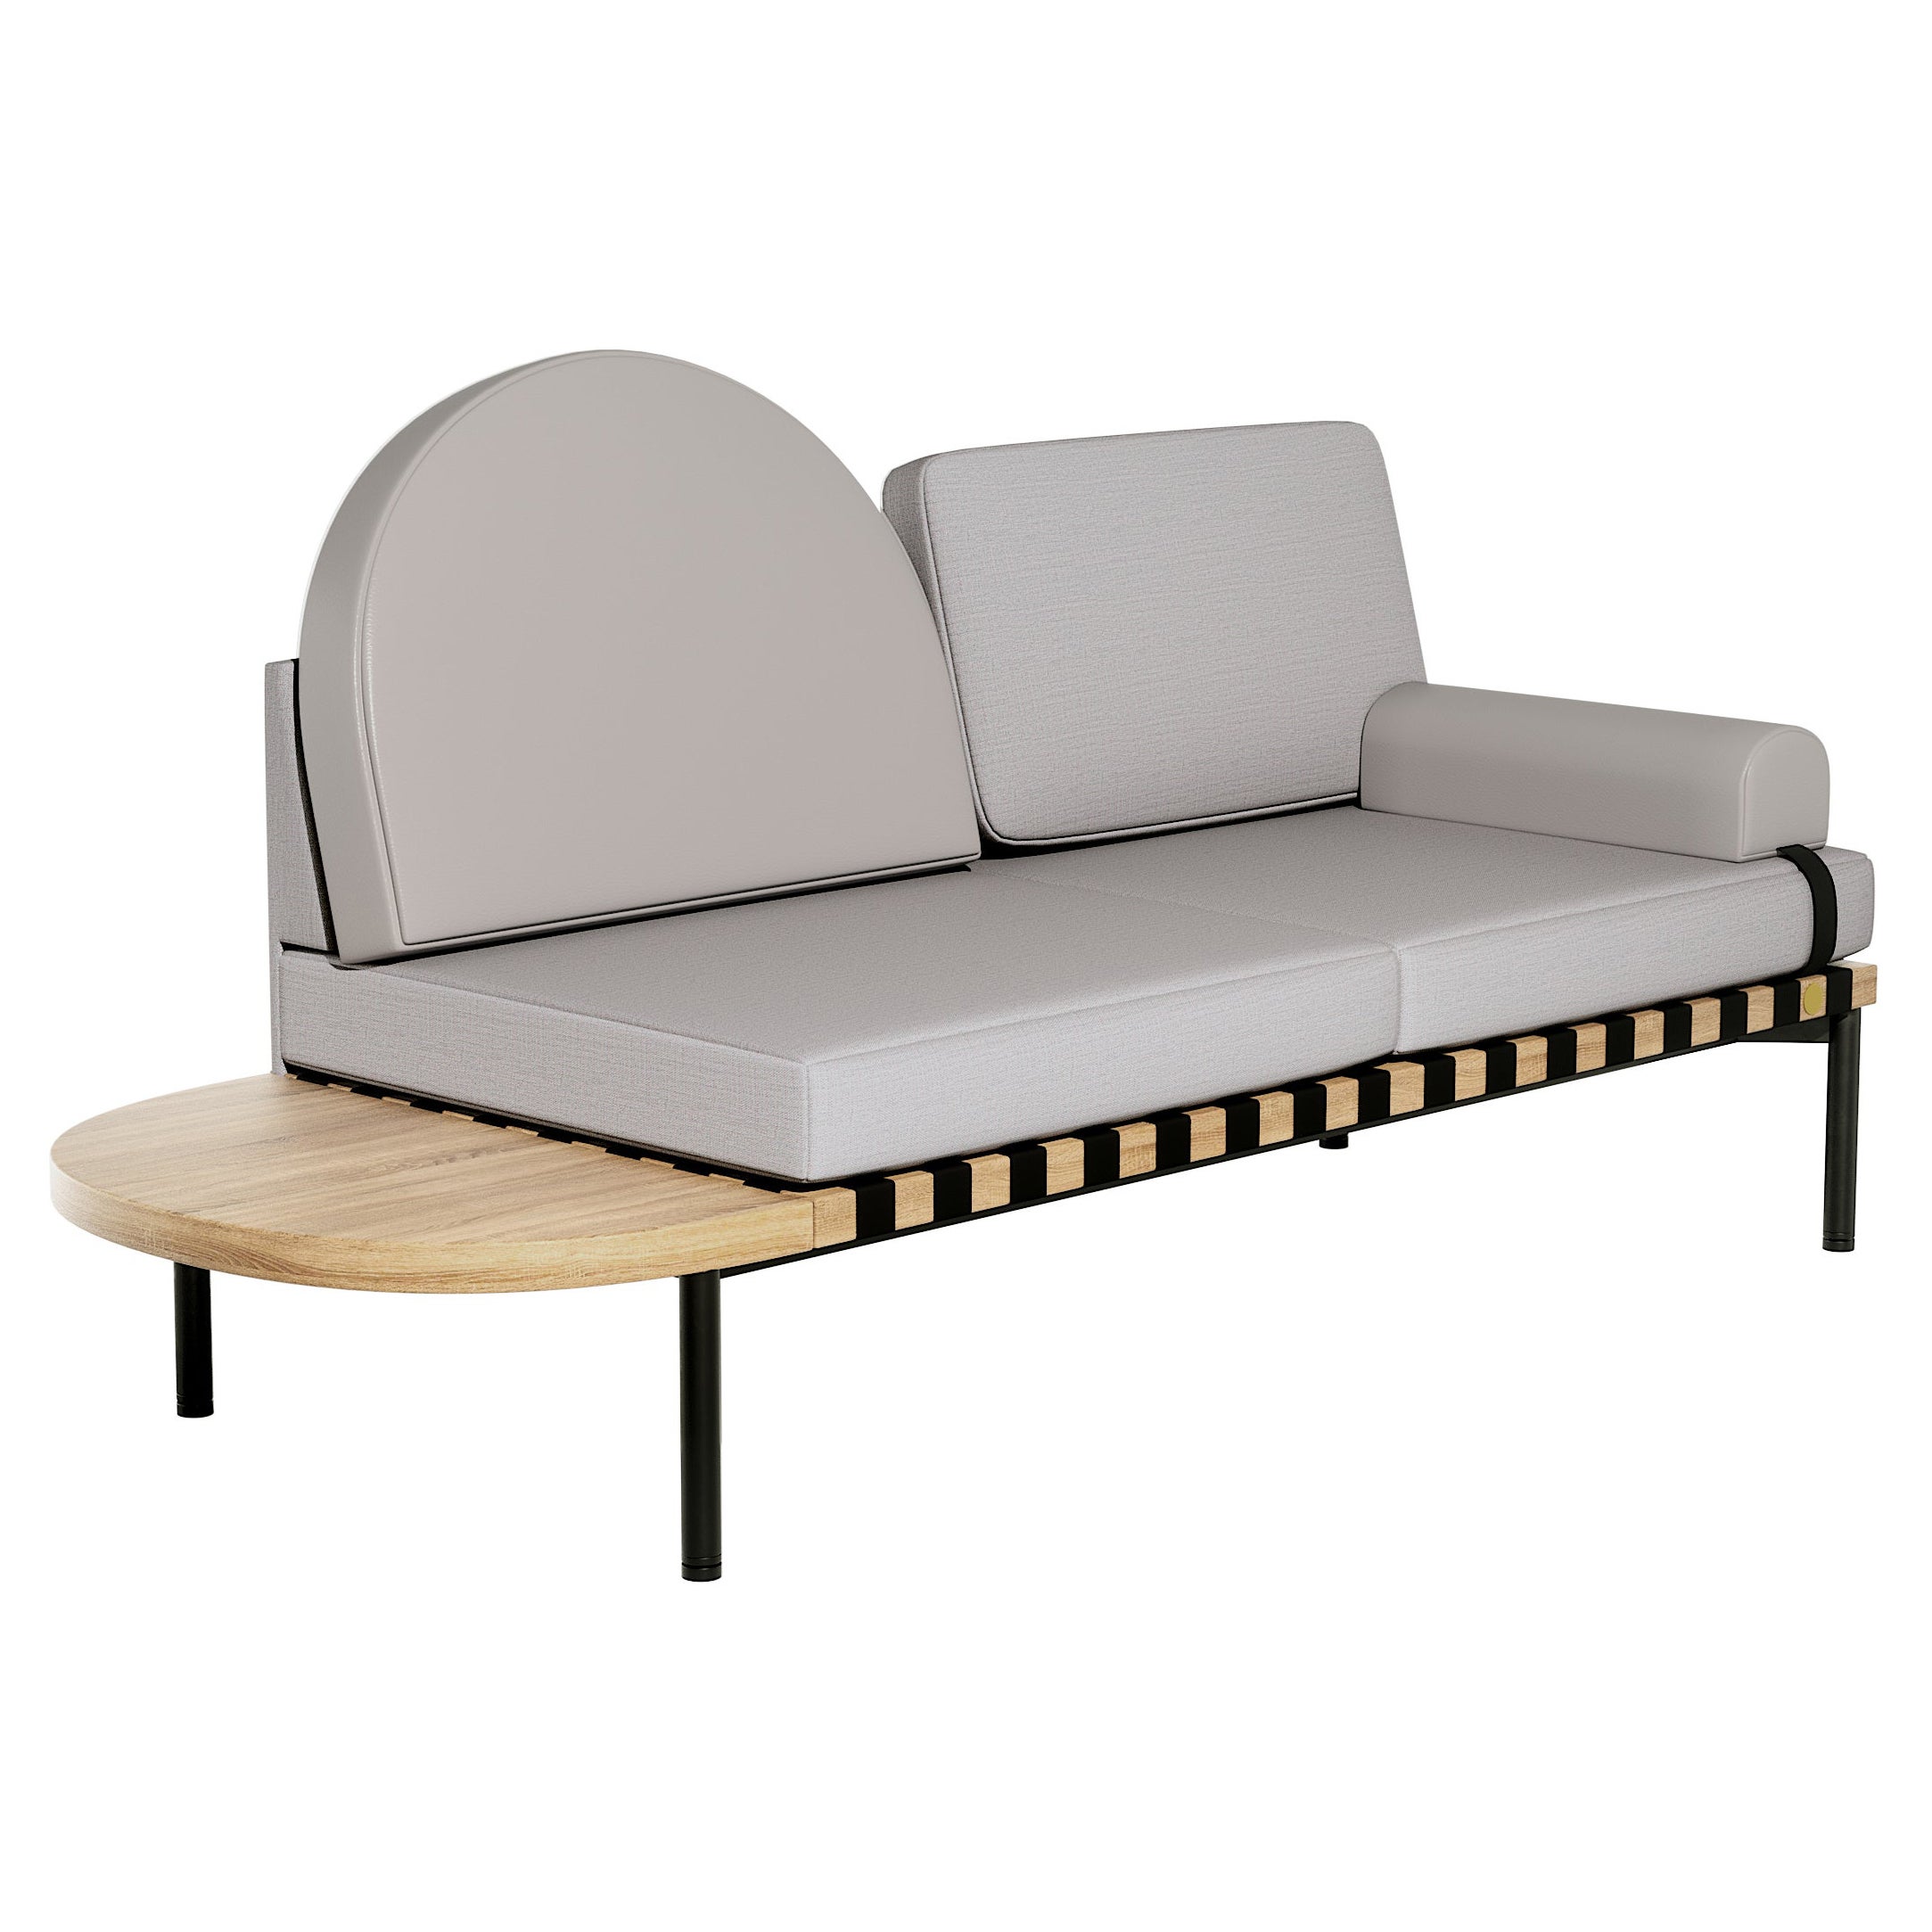 Petite Friture Grid Daybed in Grey-Blue Upholstery by Studio Pool, 2015 For Sale